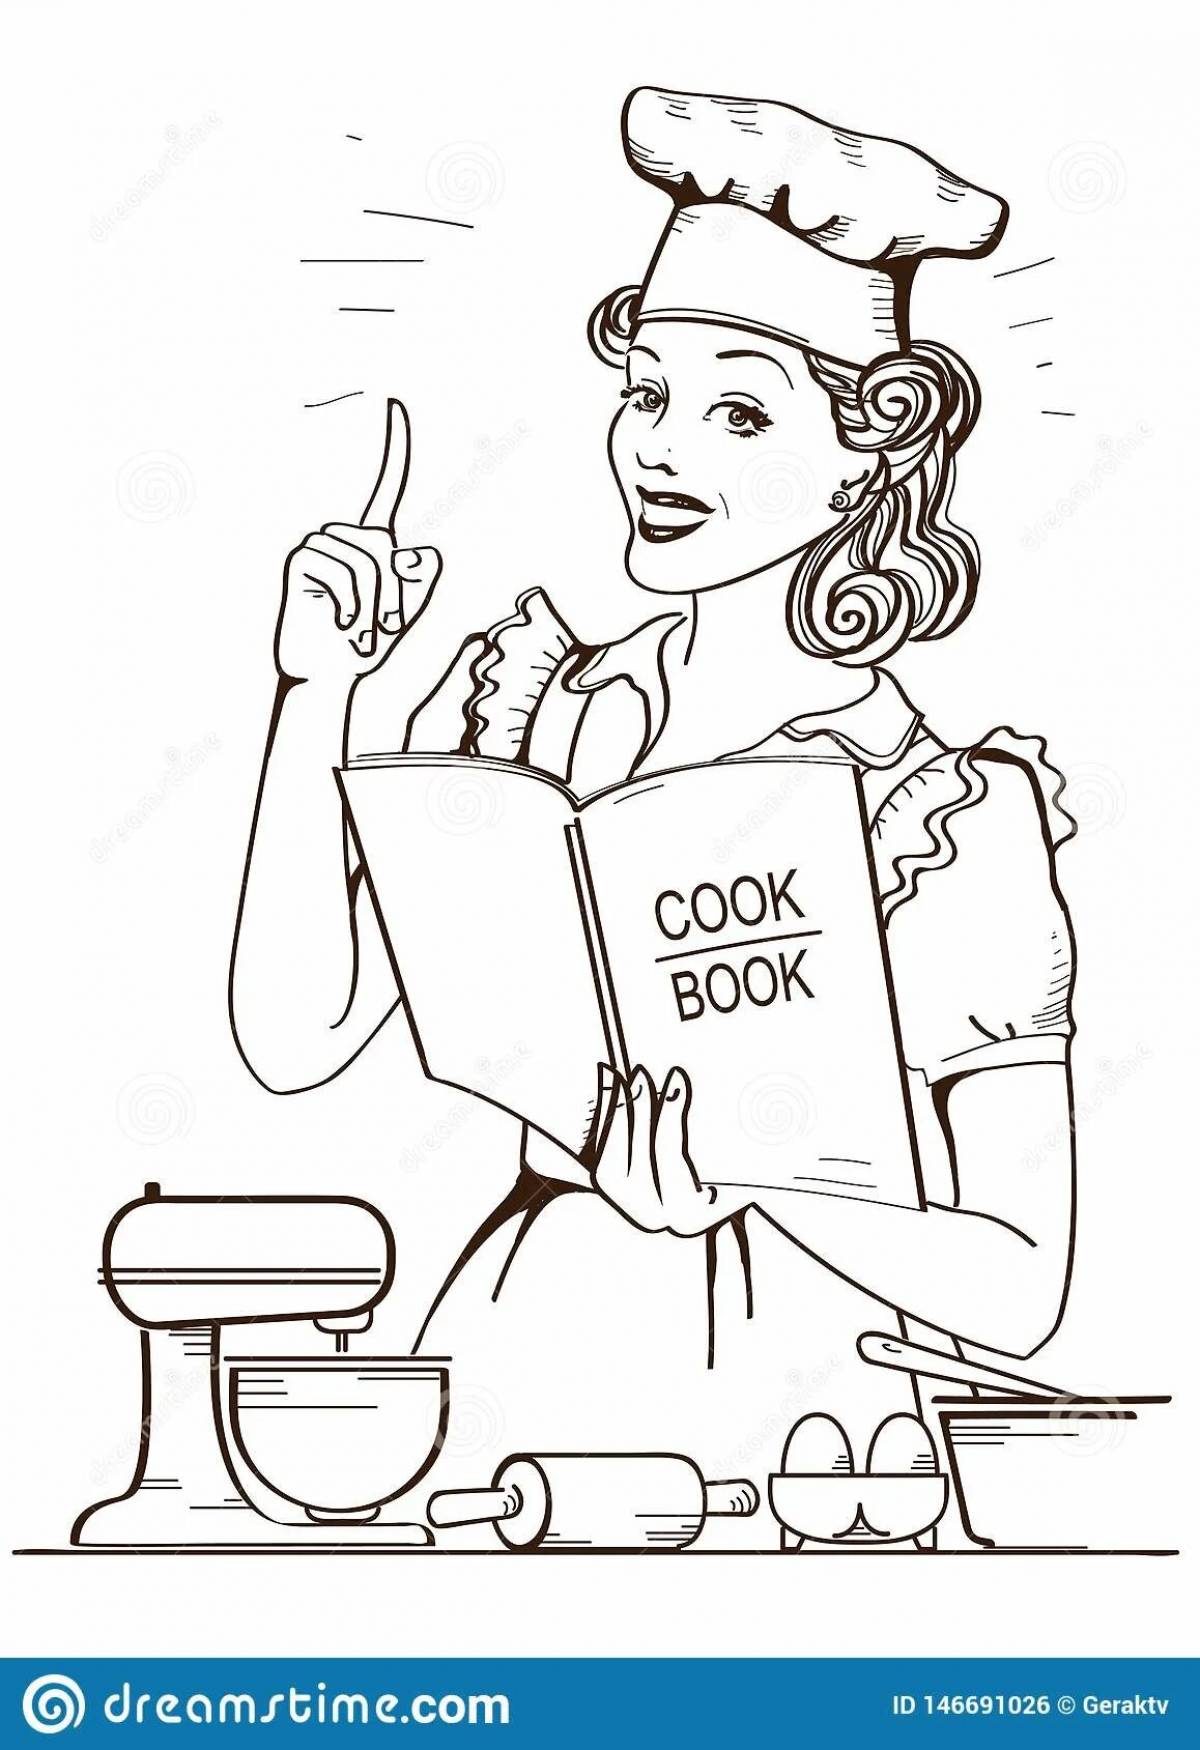 Color-lively pastry chef profession coloring page